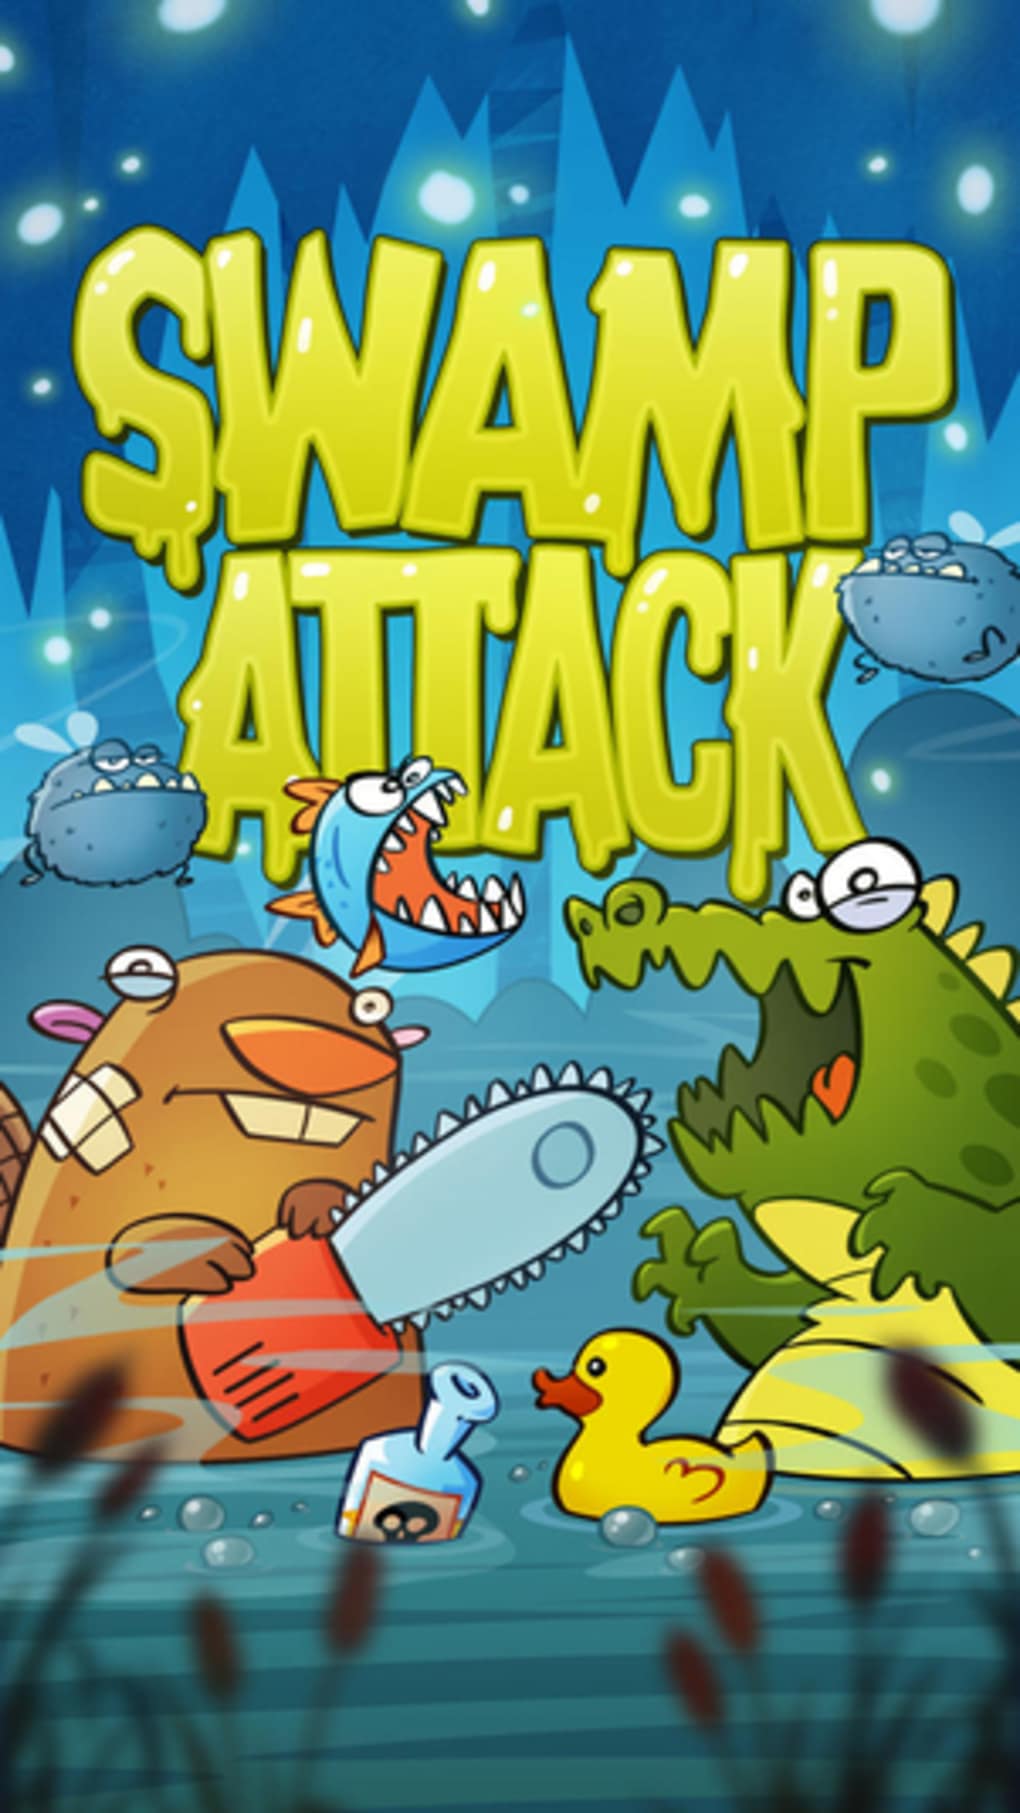 swamp attack strategy